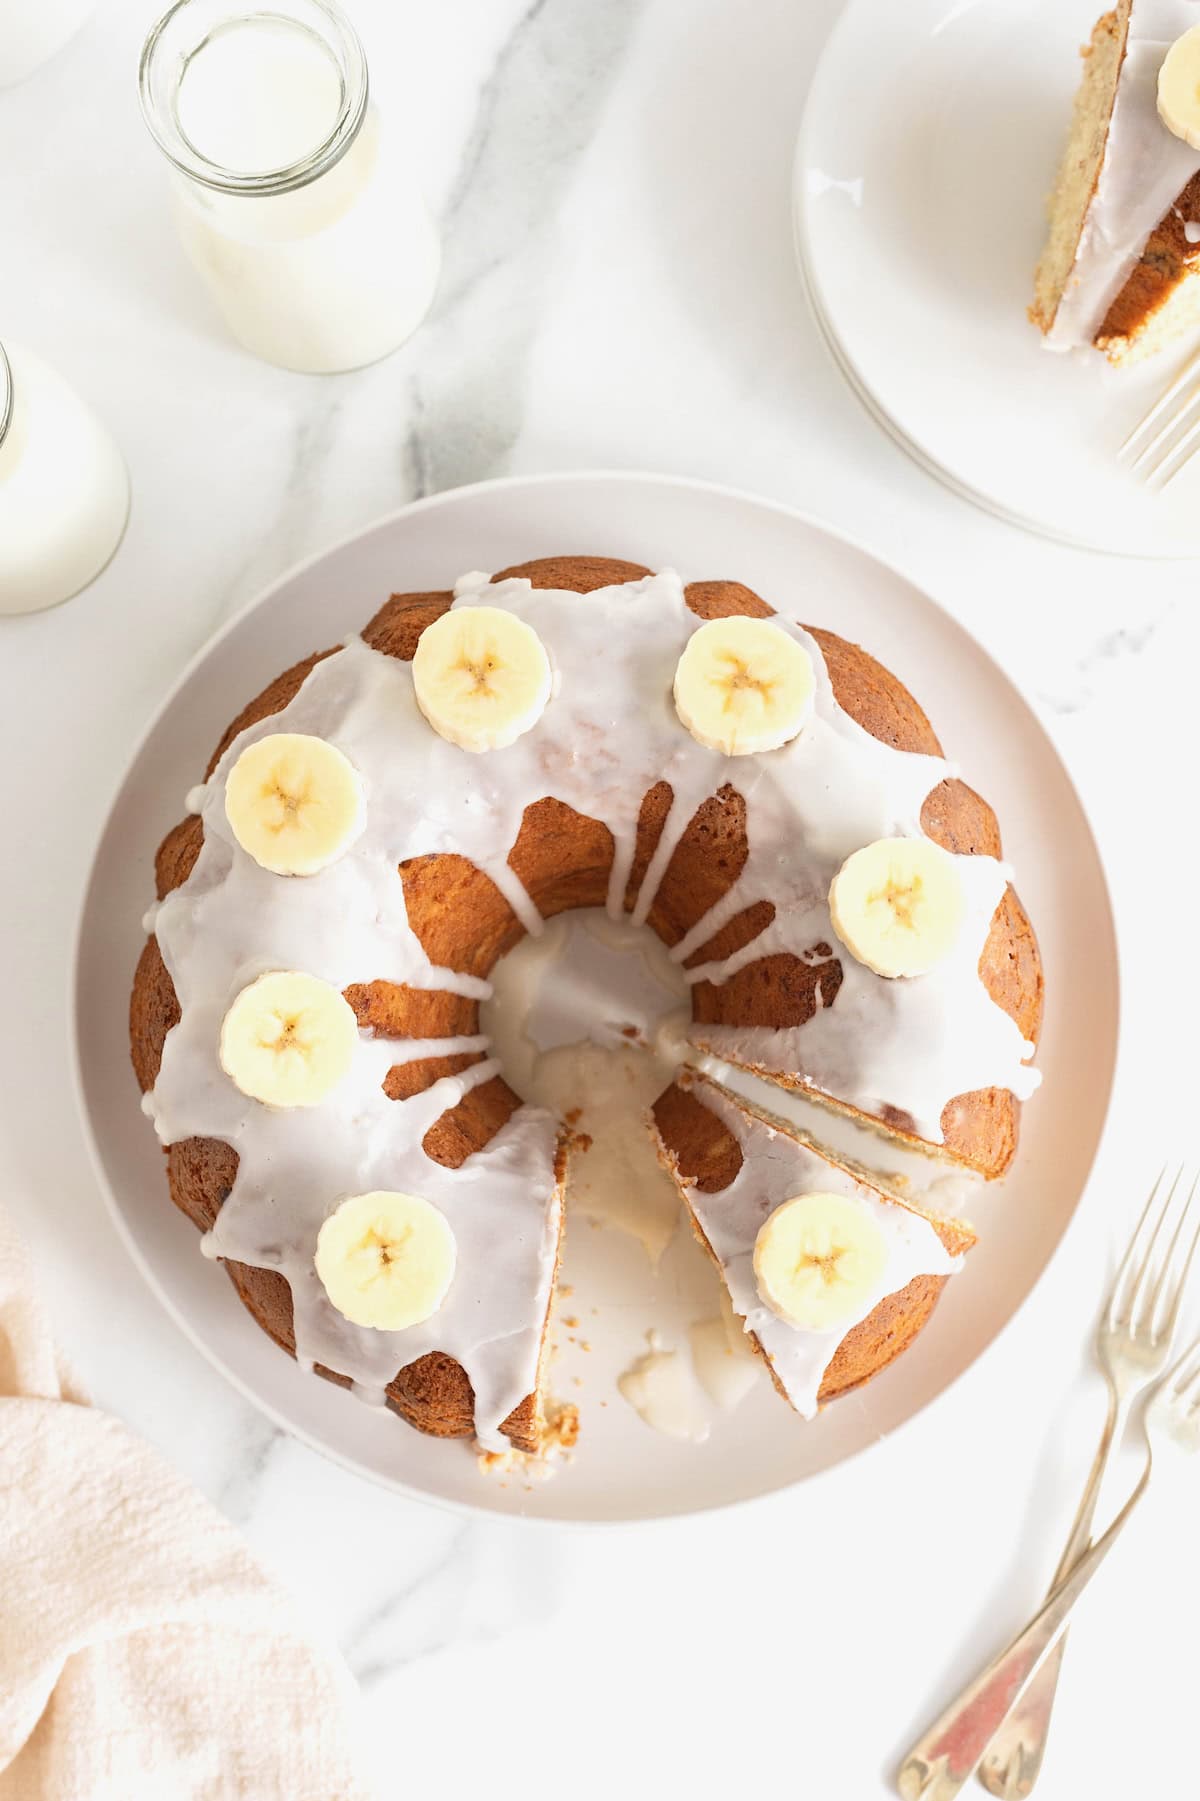 Seen from above, a glazed pound cake garnished with banana slices on a white serving plate.